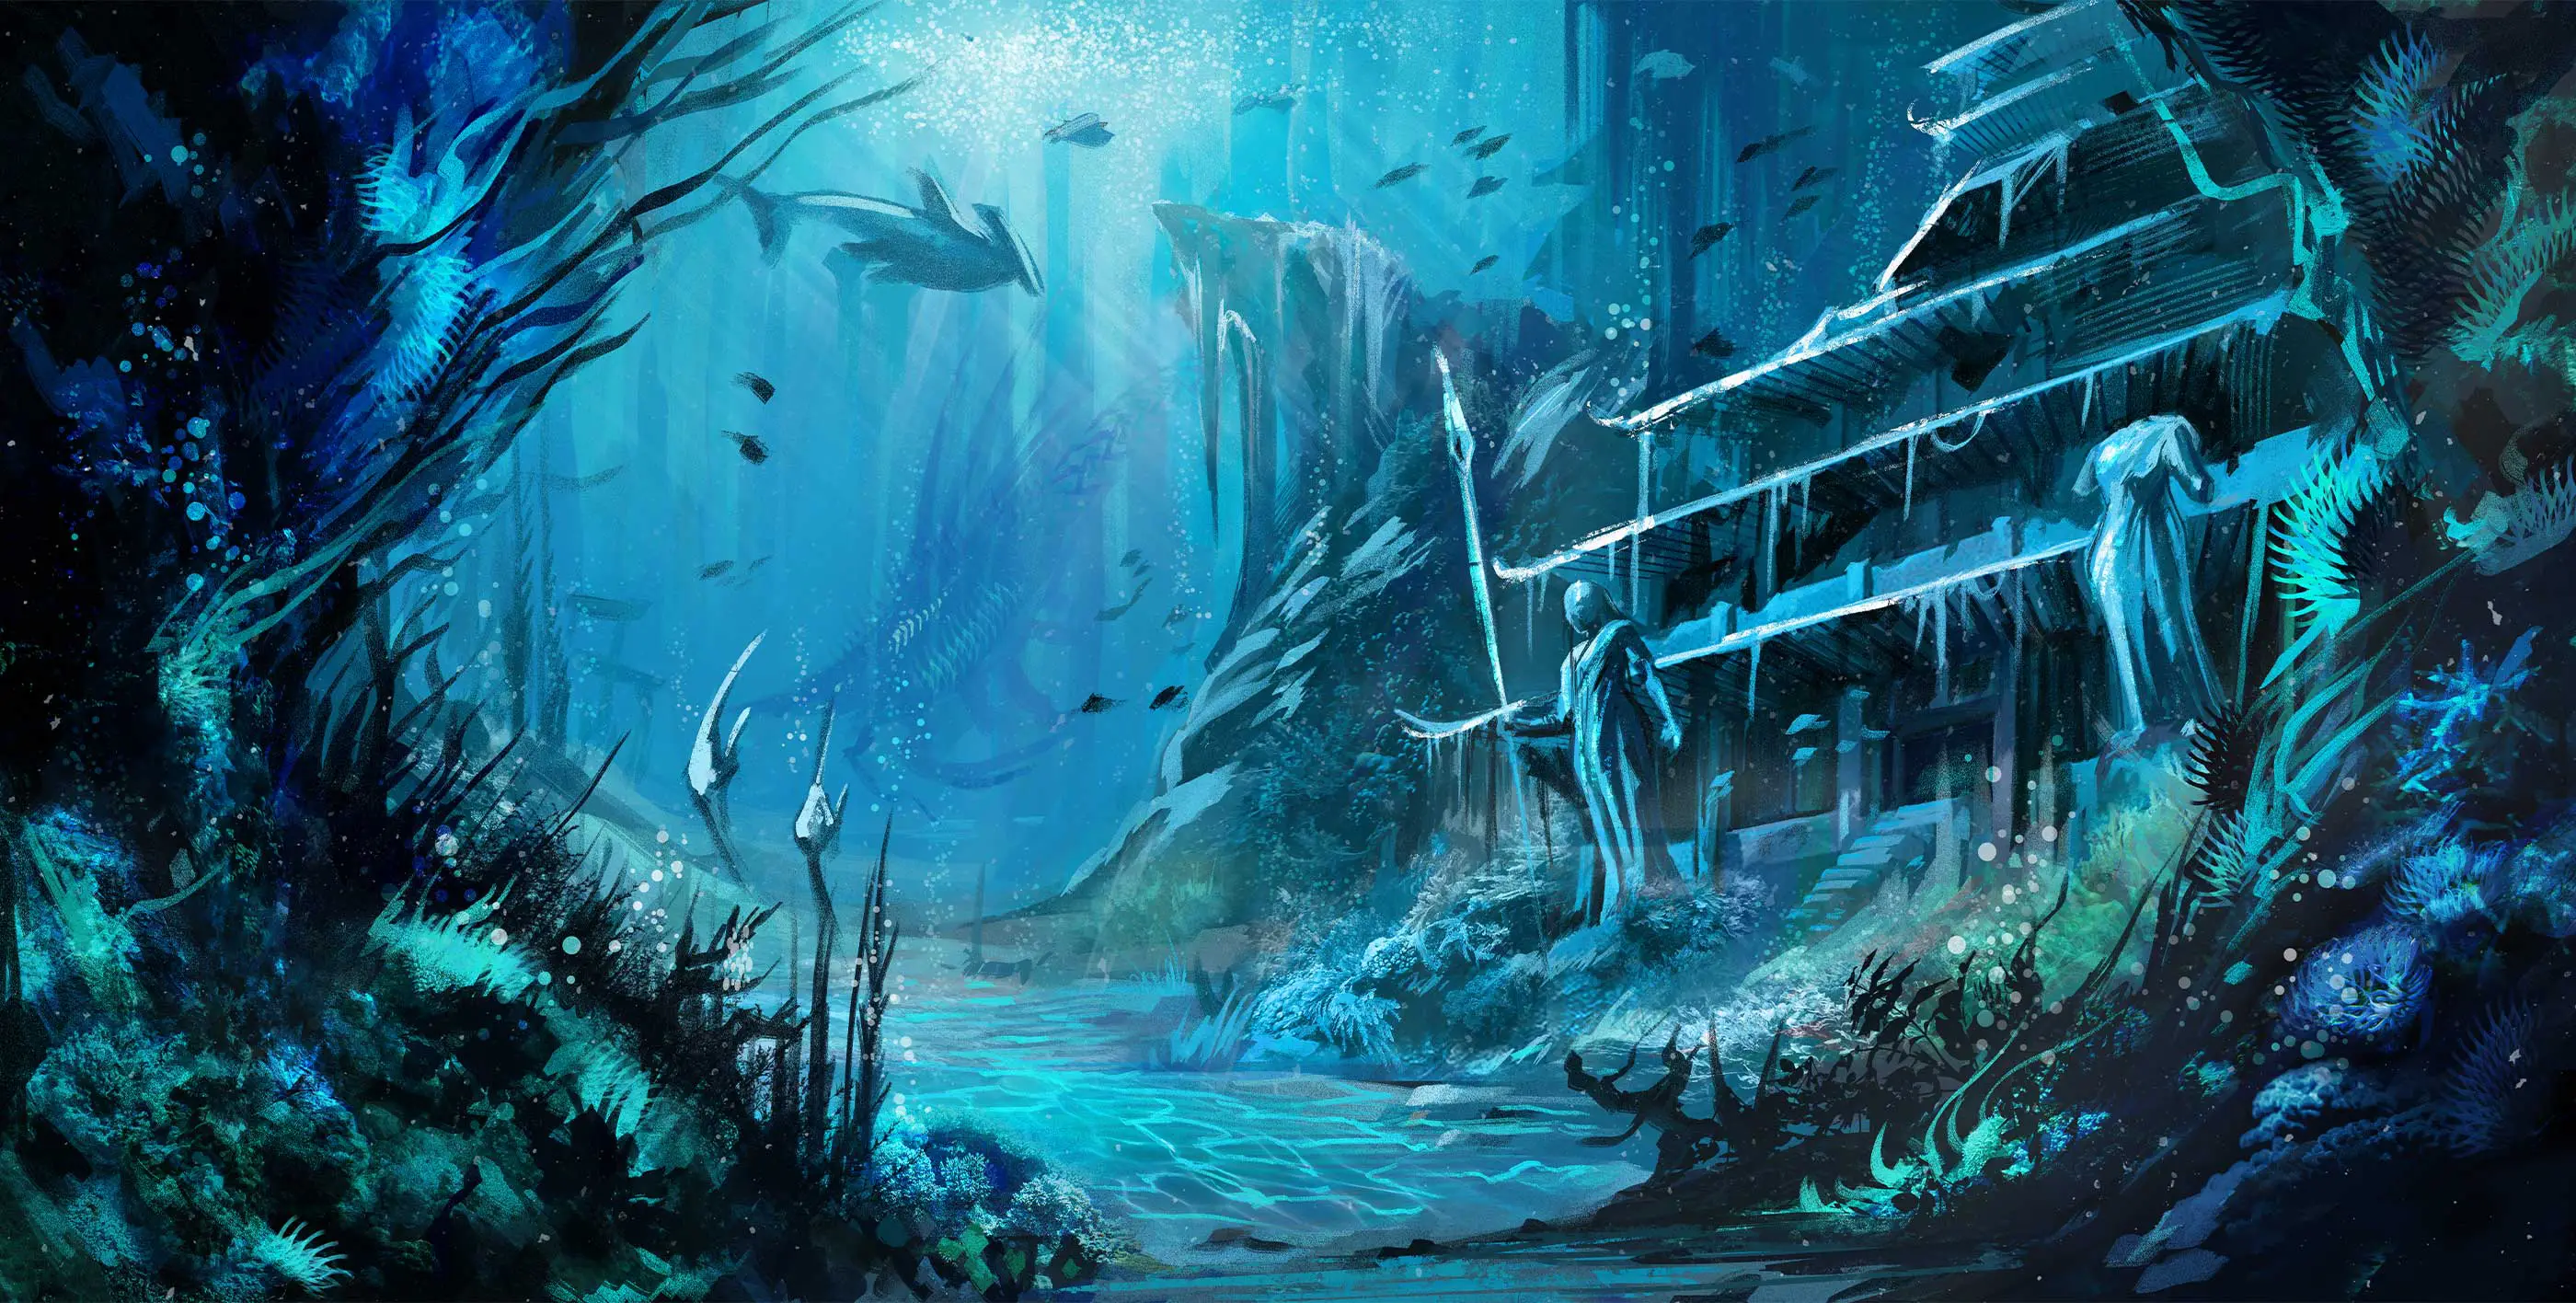 A painting of an underwater temple.